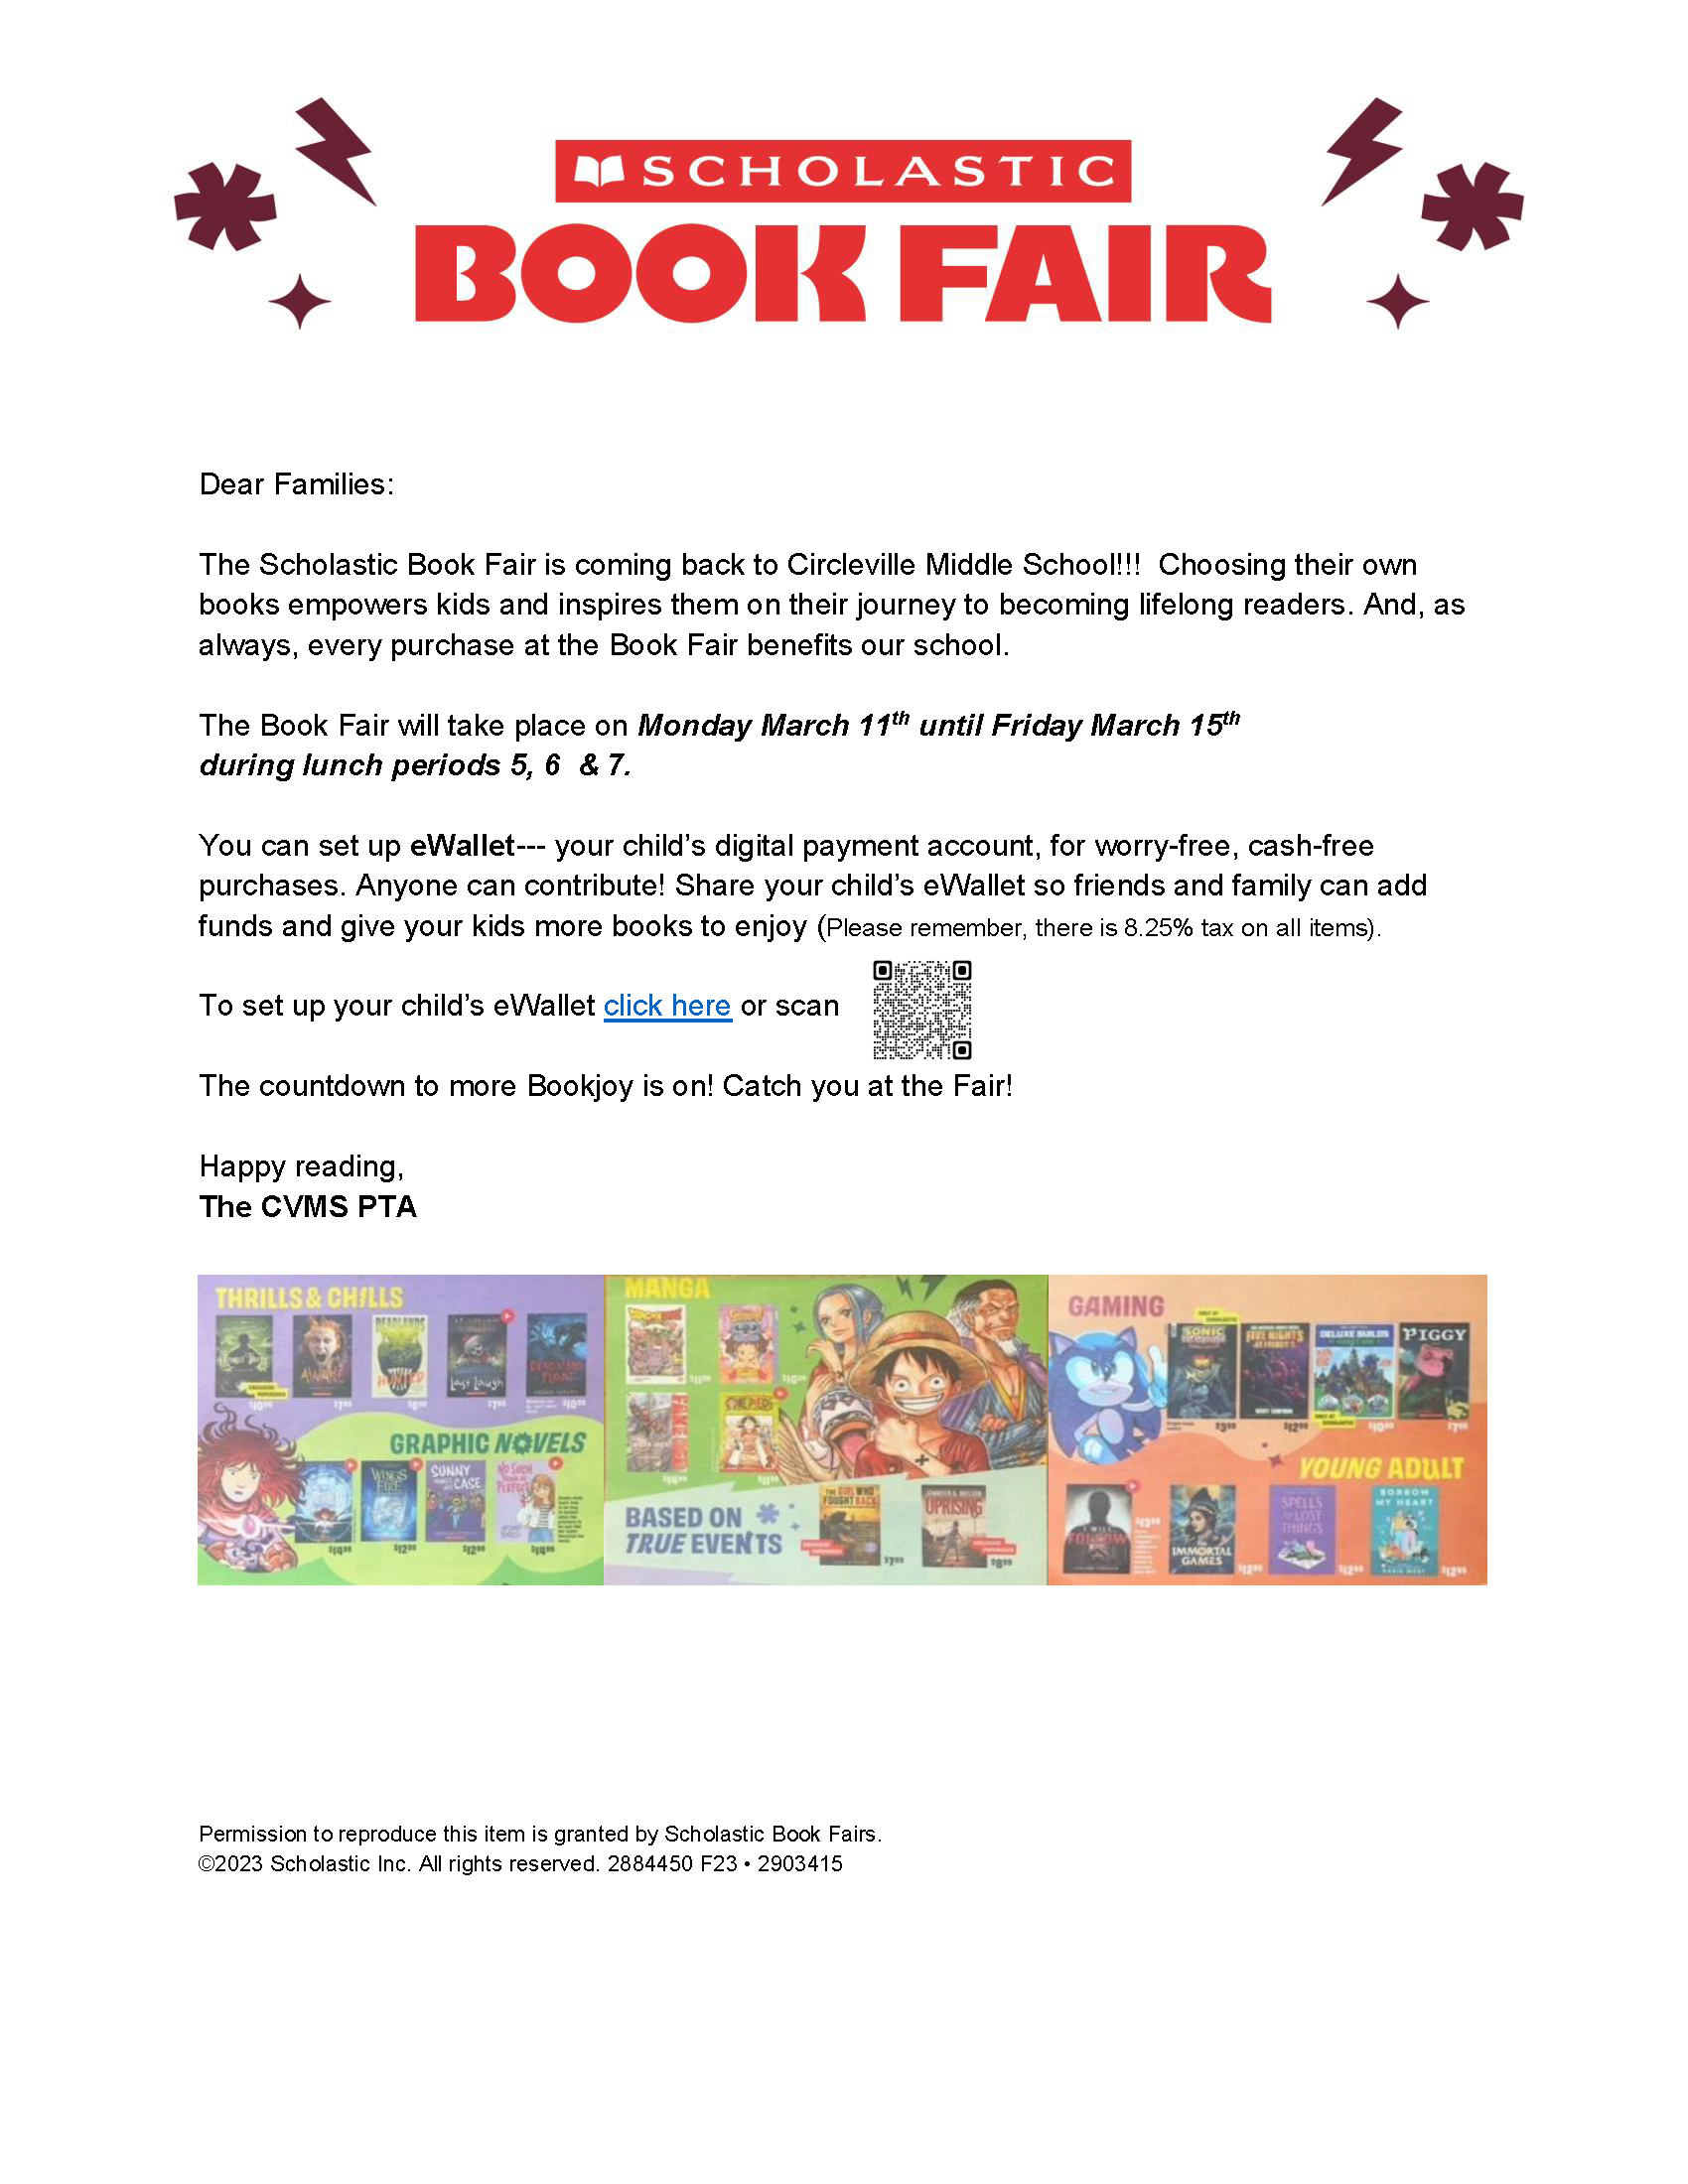 Says Scholastic Book Fair. CVMS Monday march 11 to Friday, March 15.